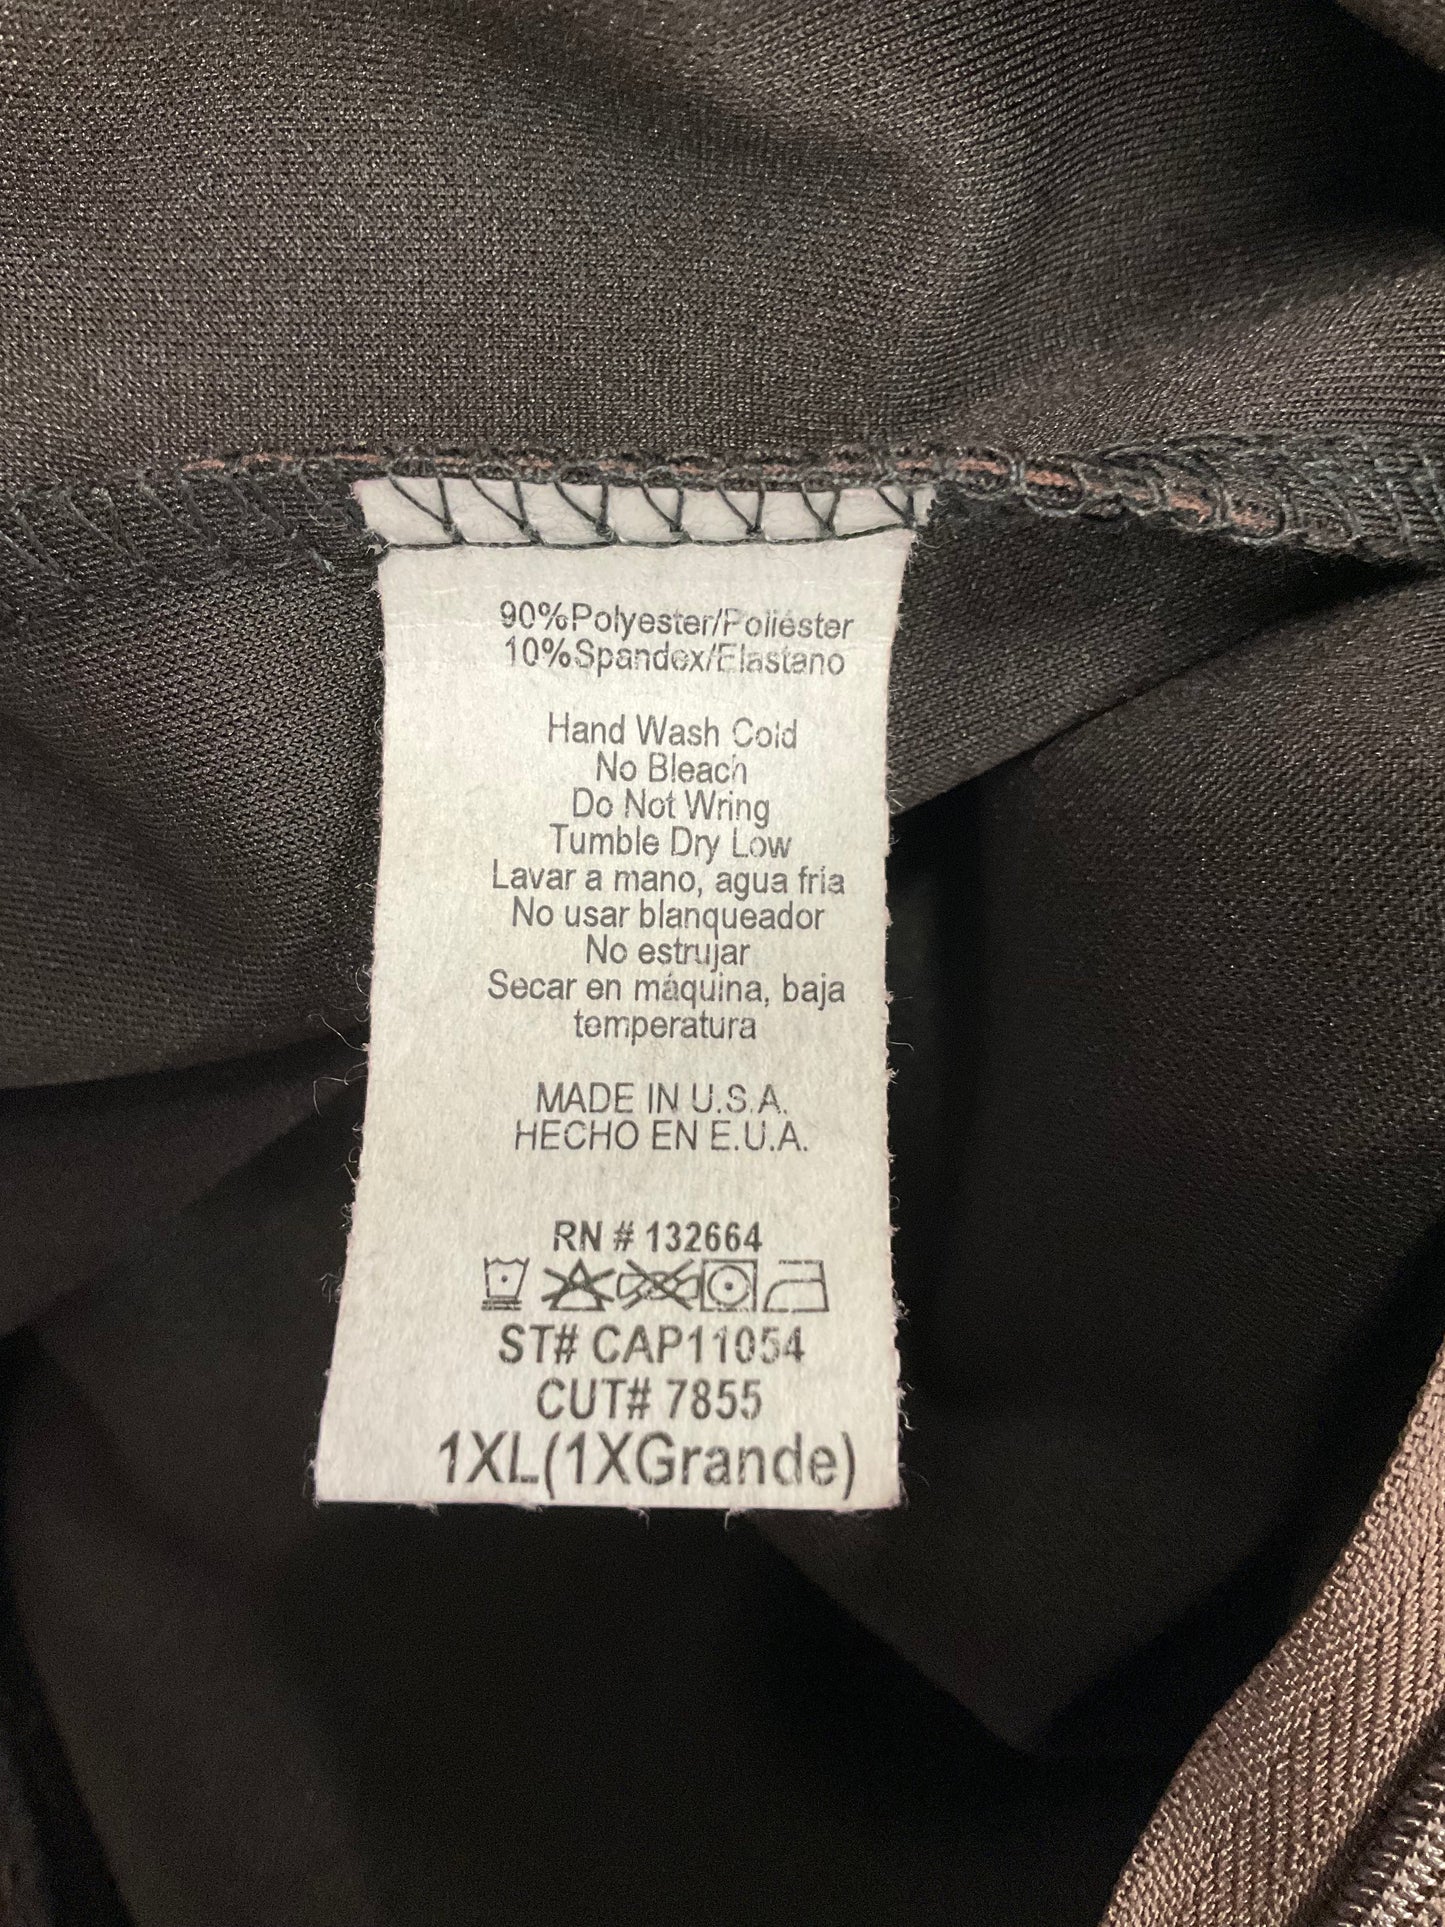 Brown Pants Work/dress Clothes Mentor, Size 1x